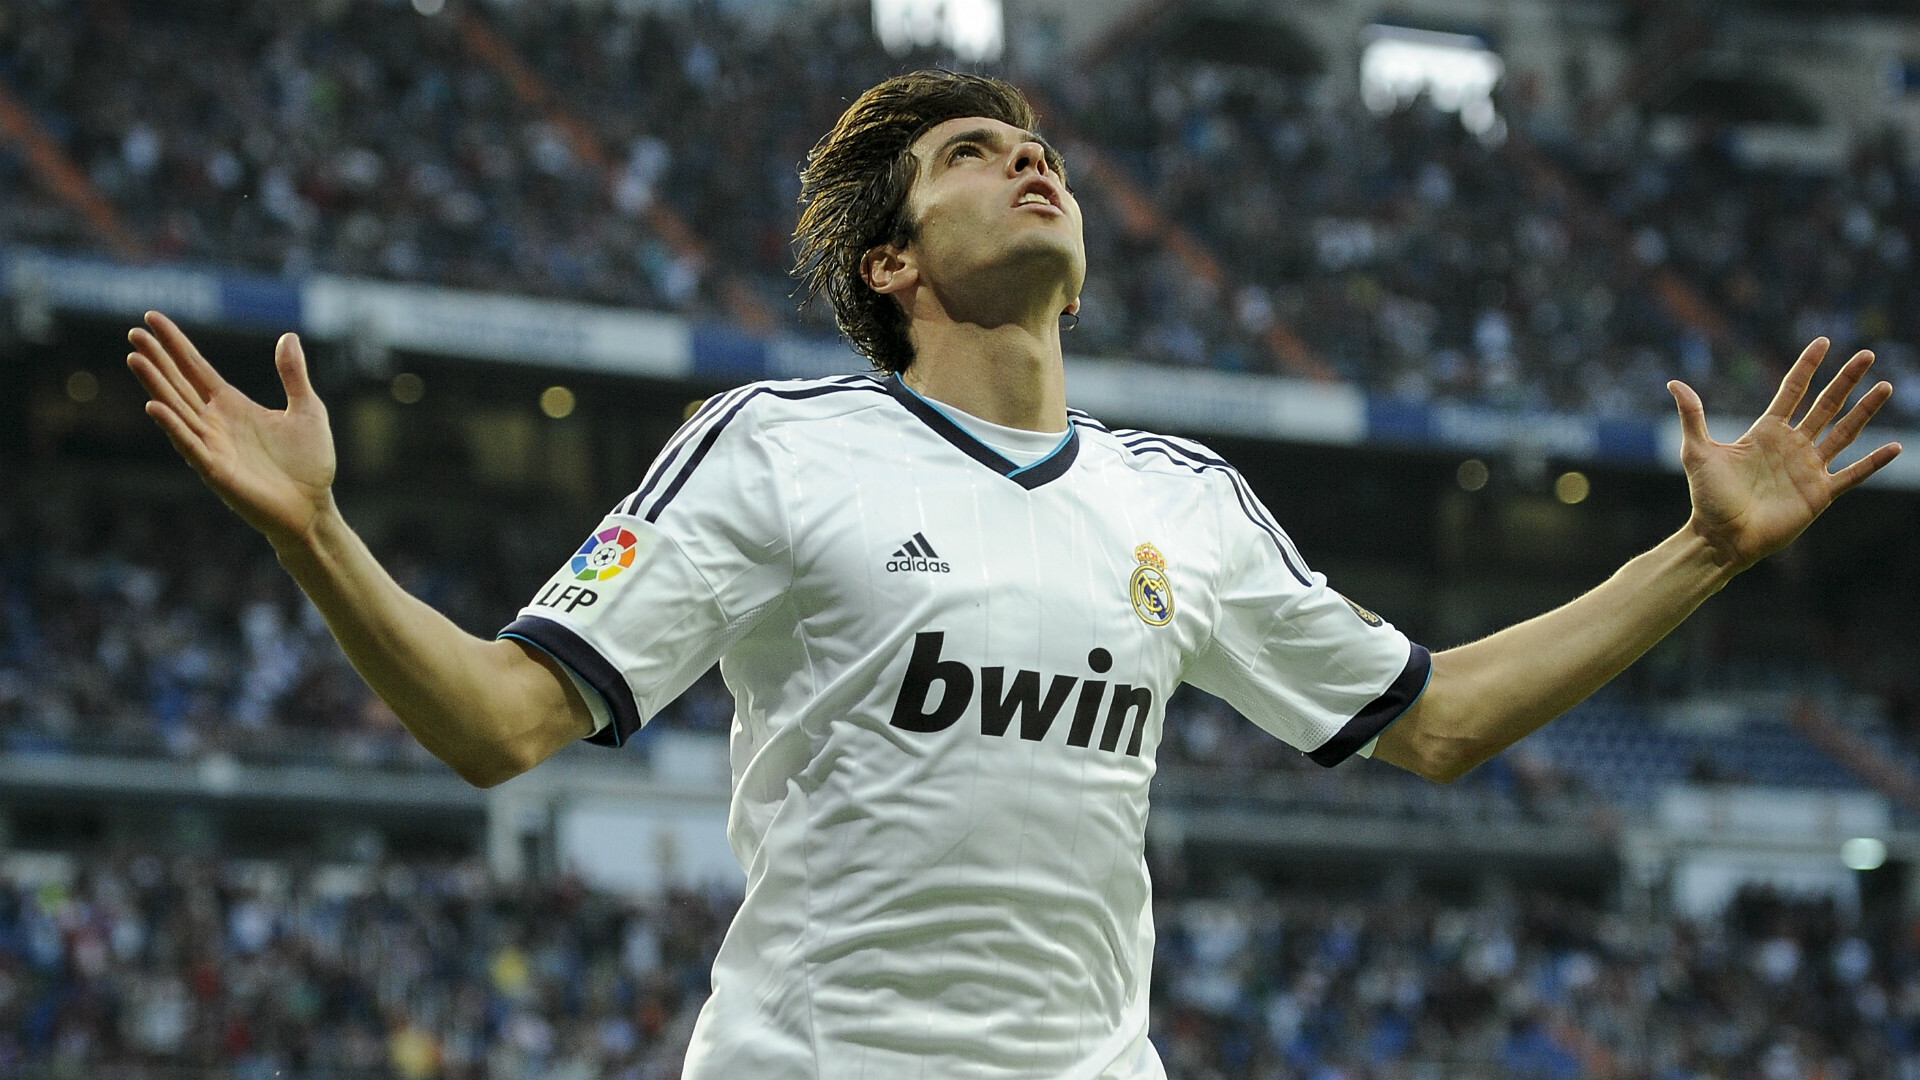 Kaká: Real Madrid, The first sportsperson to amass 10 million followers on Twitter. 1920x1080 Full HD Background.